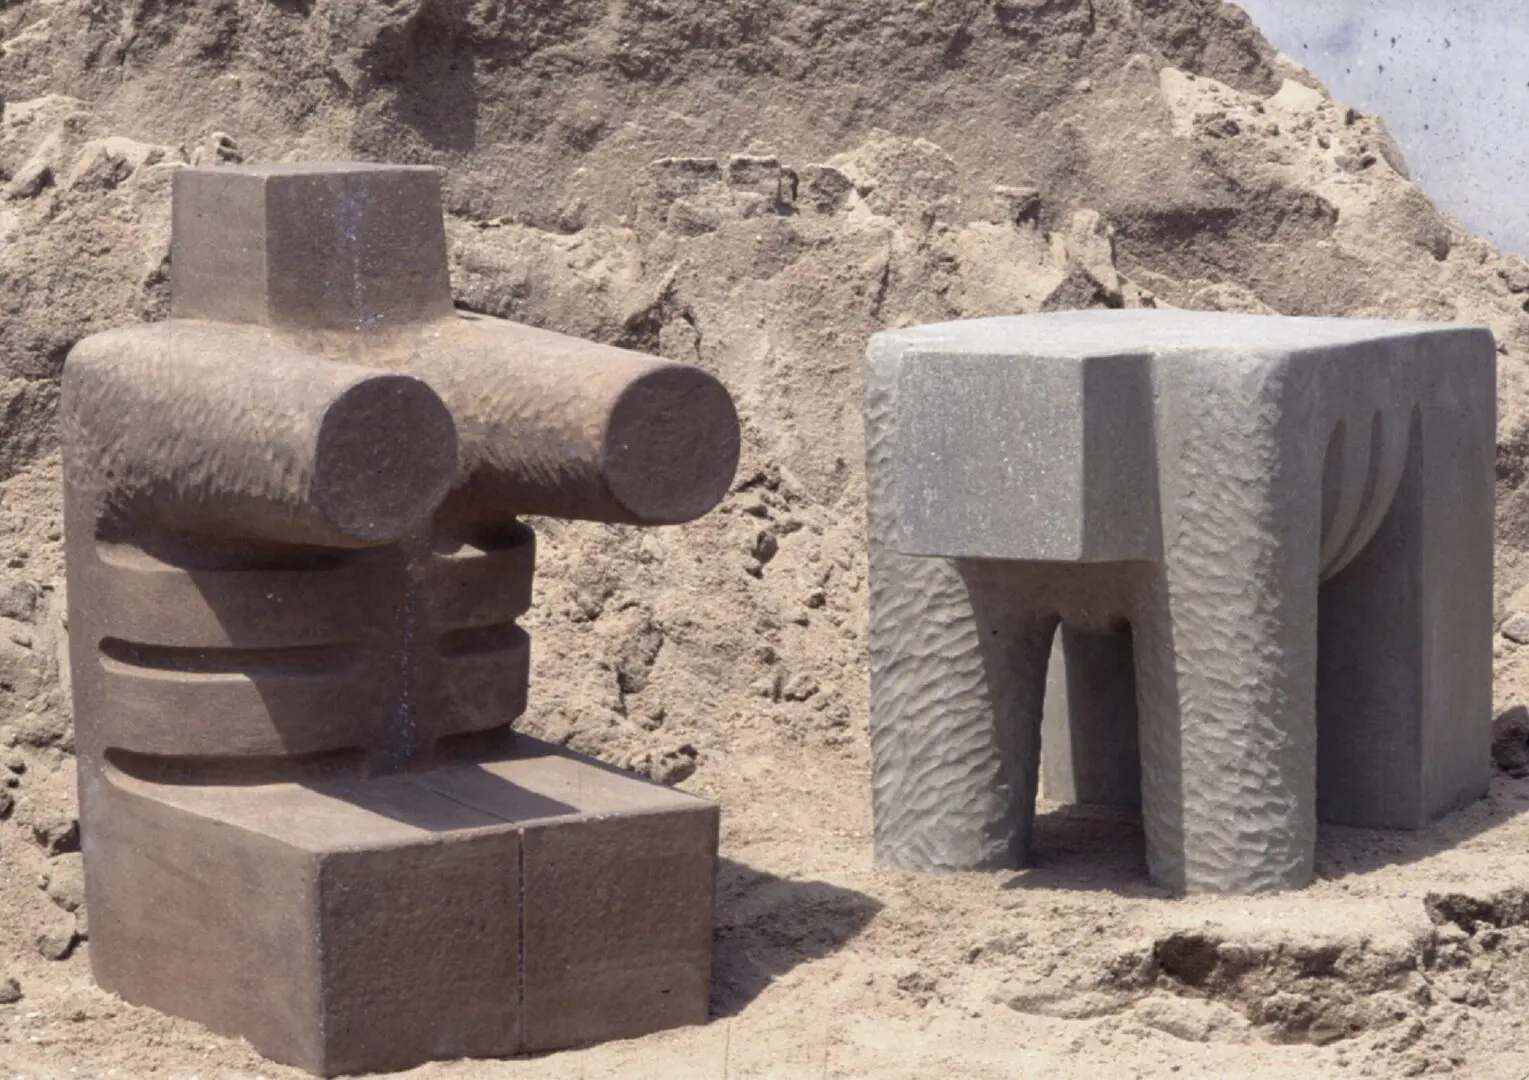 A stone sculpture of two blocks and one block